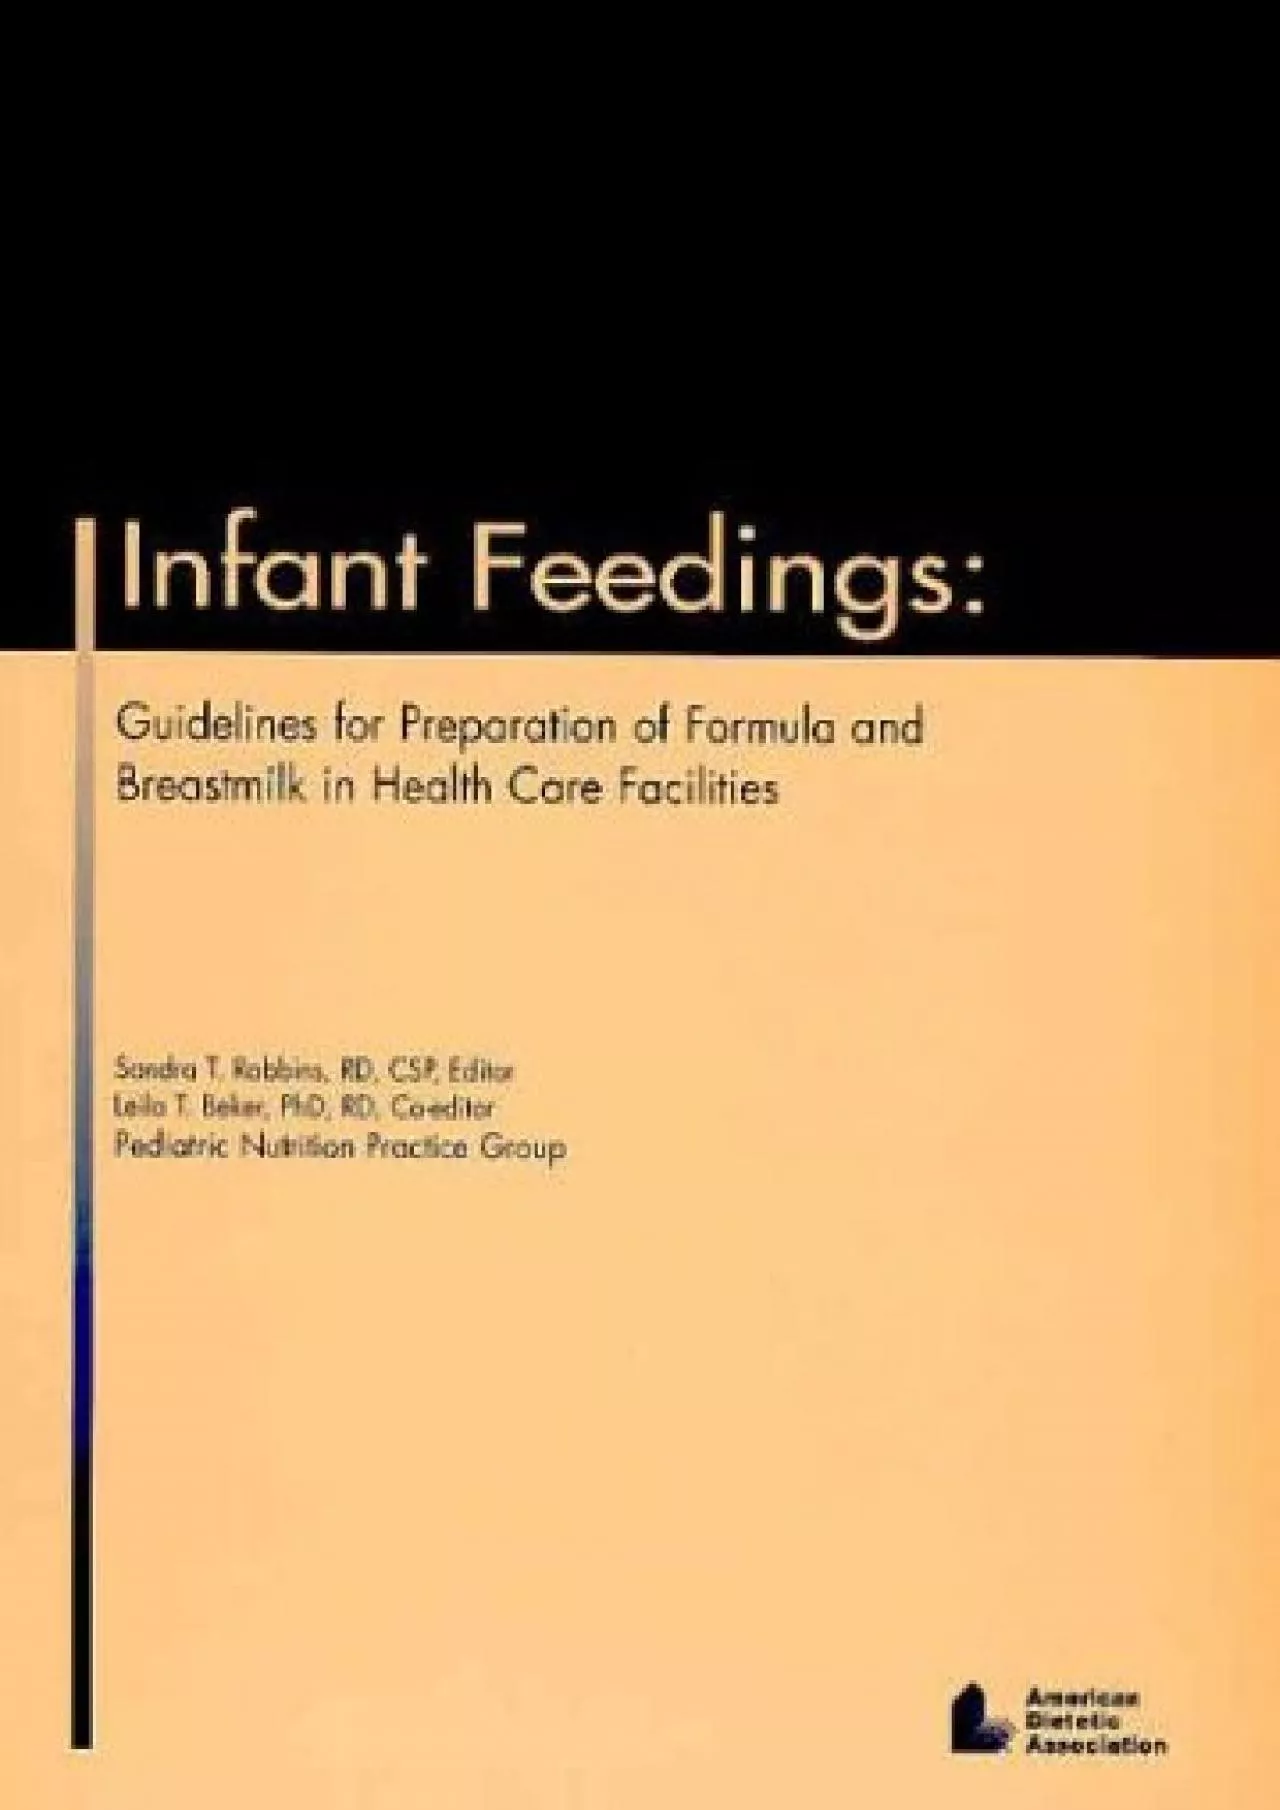 (DOWNLOAD)-Infant Feedings: Guidelines For Preparation Of Formula And Breastmilk In Health